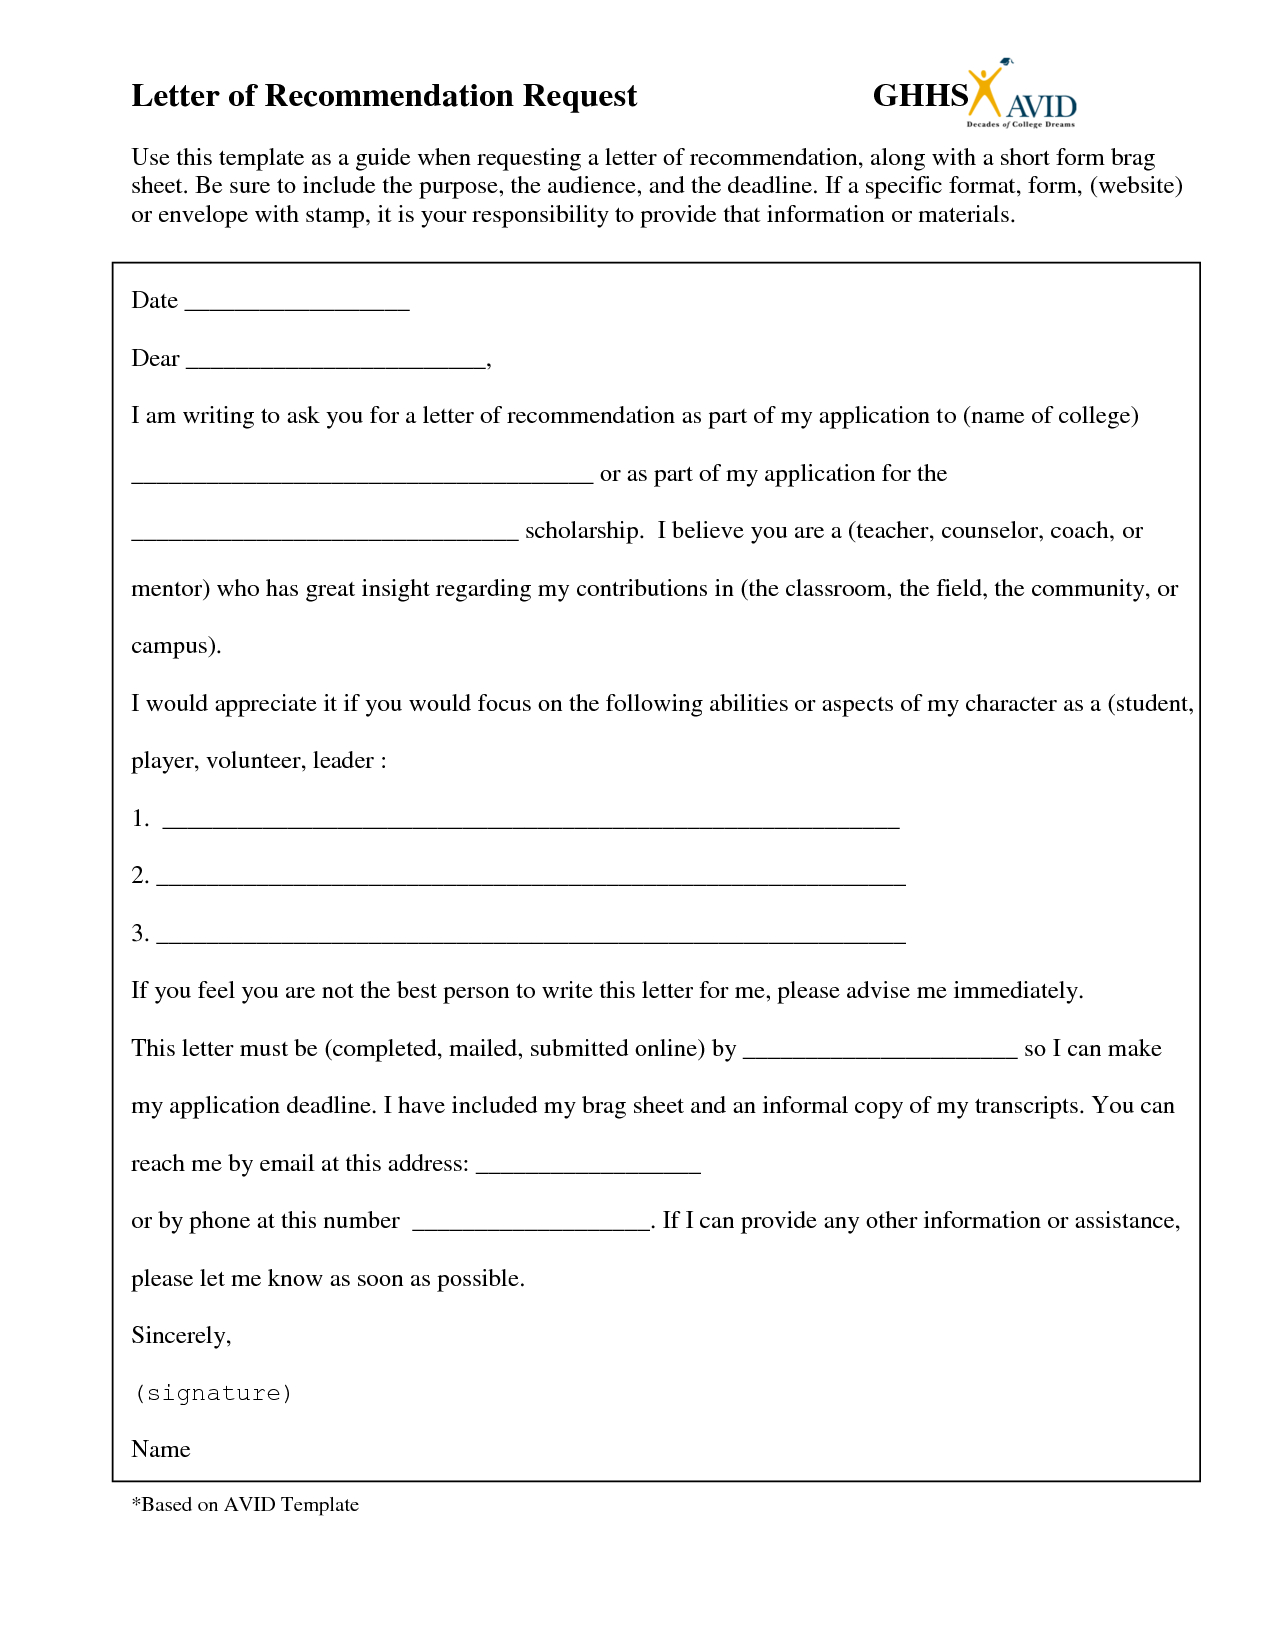 Request For Letter Of Reccomendation Template intended for dimensions 1275 X 1650